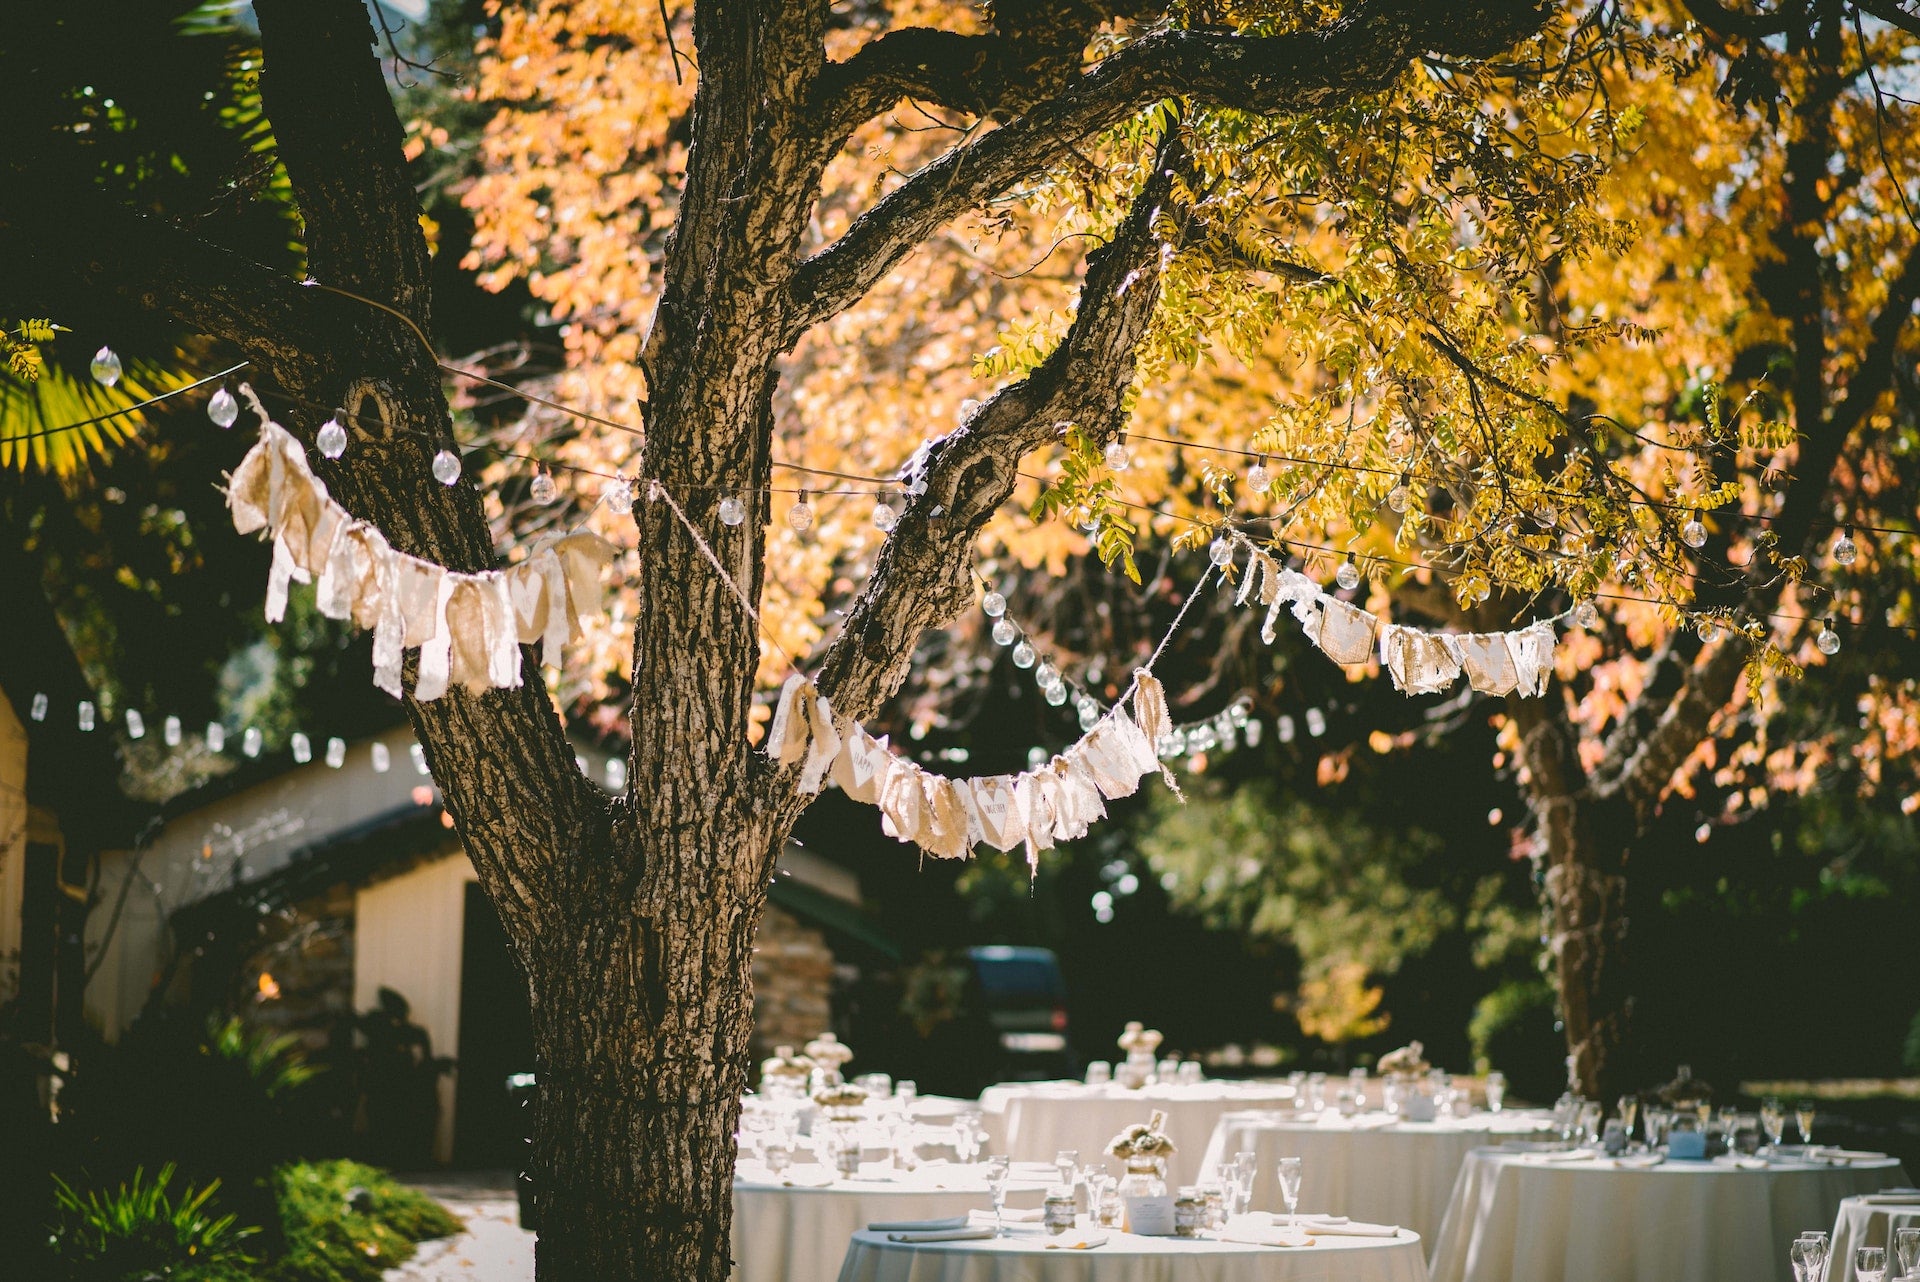 Outdoor wedding reception with hanging banners